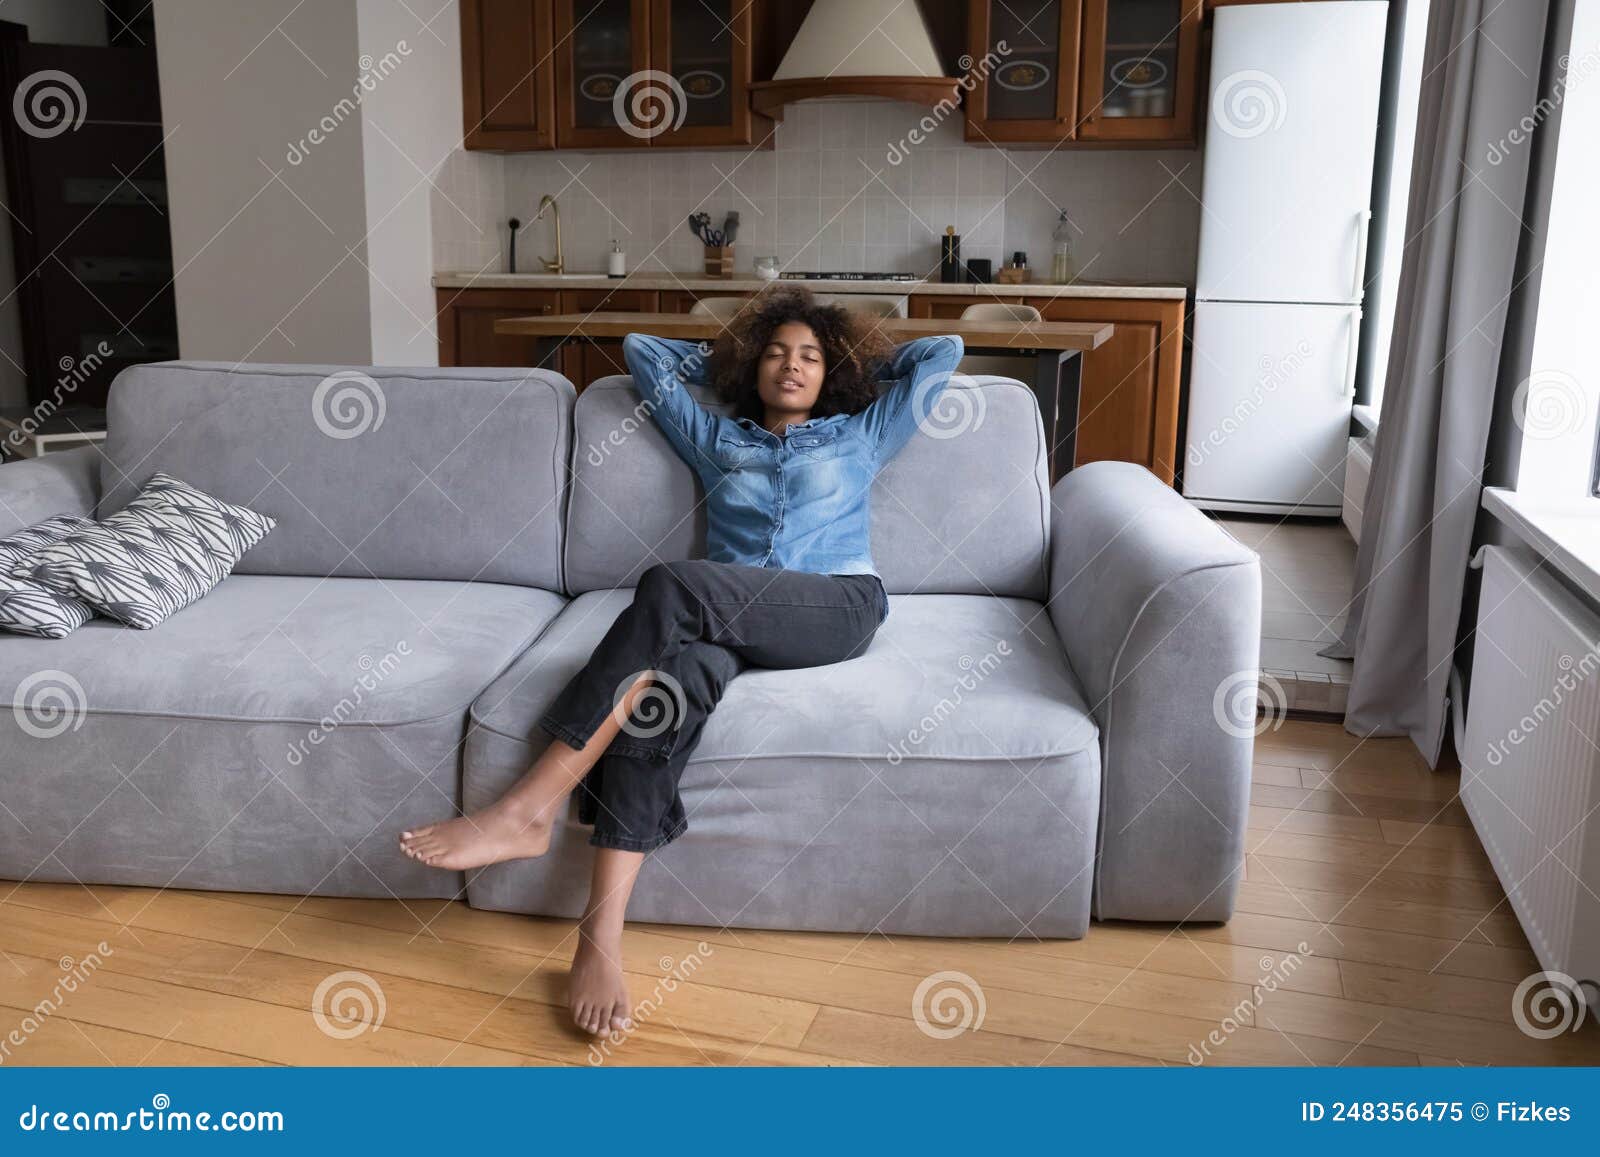 anna szoke recommends couch for teens pic